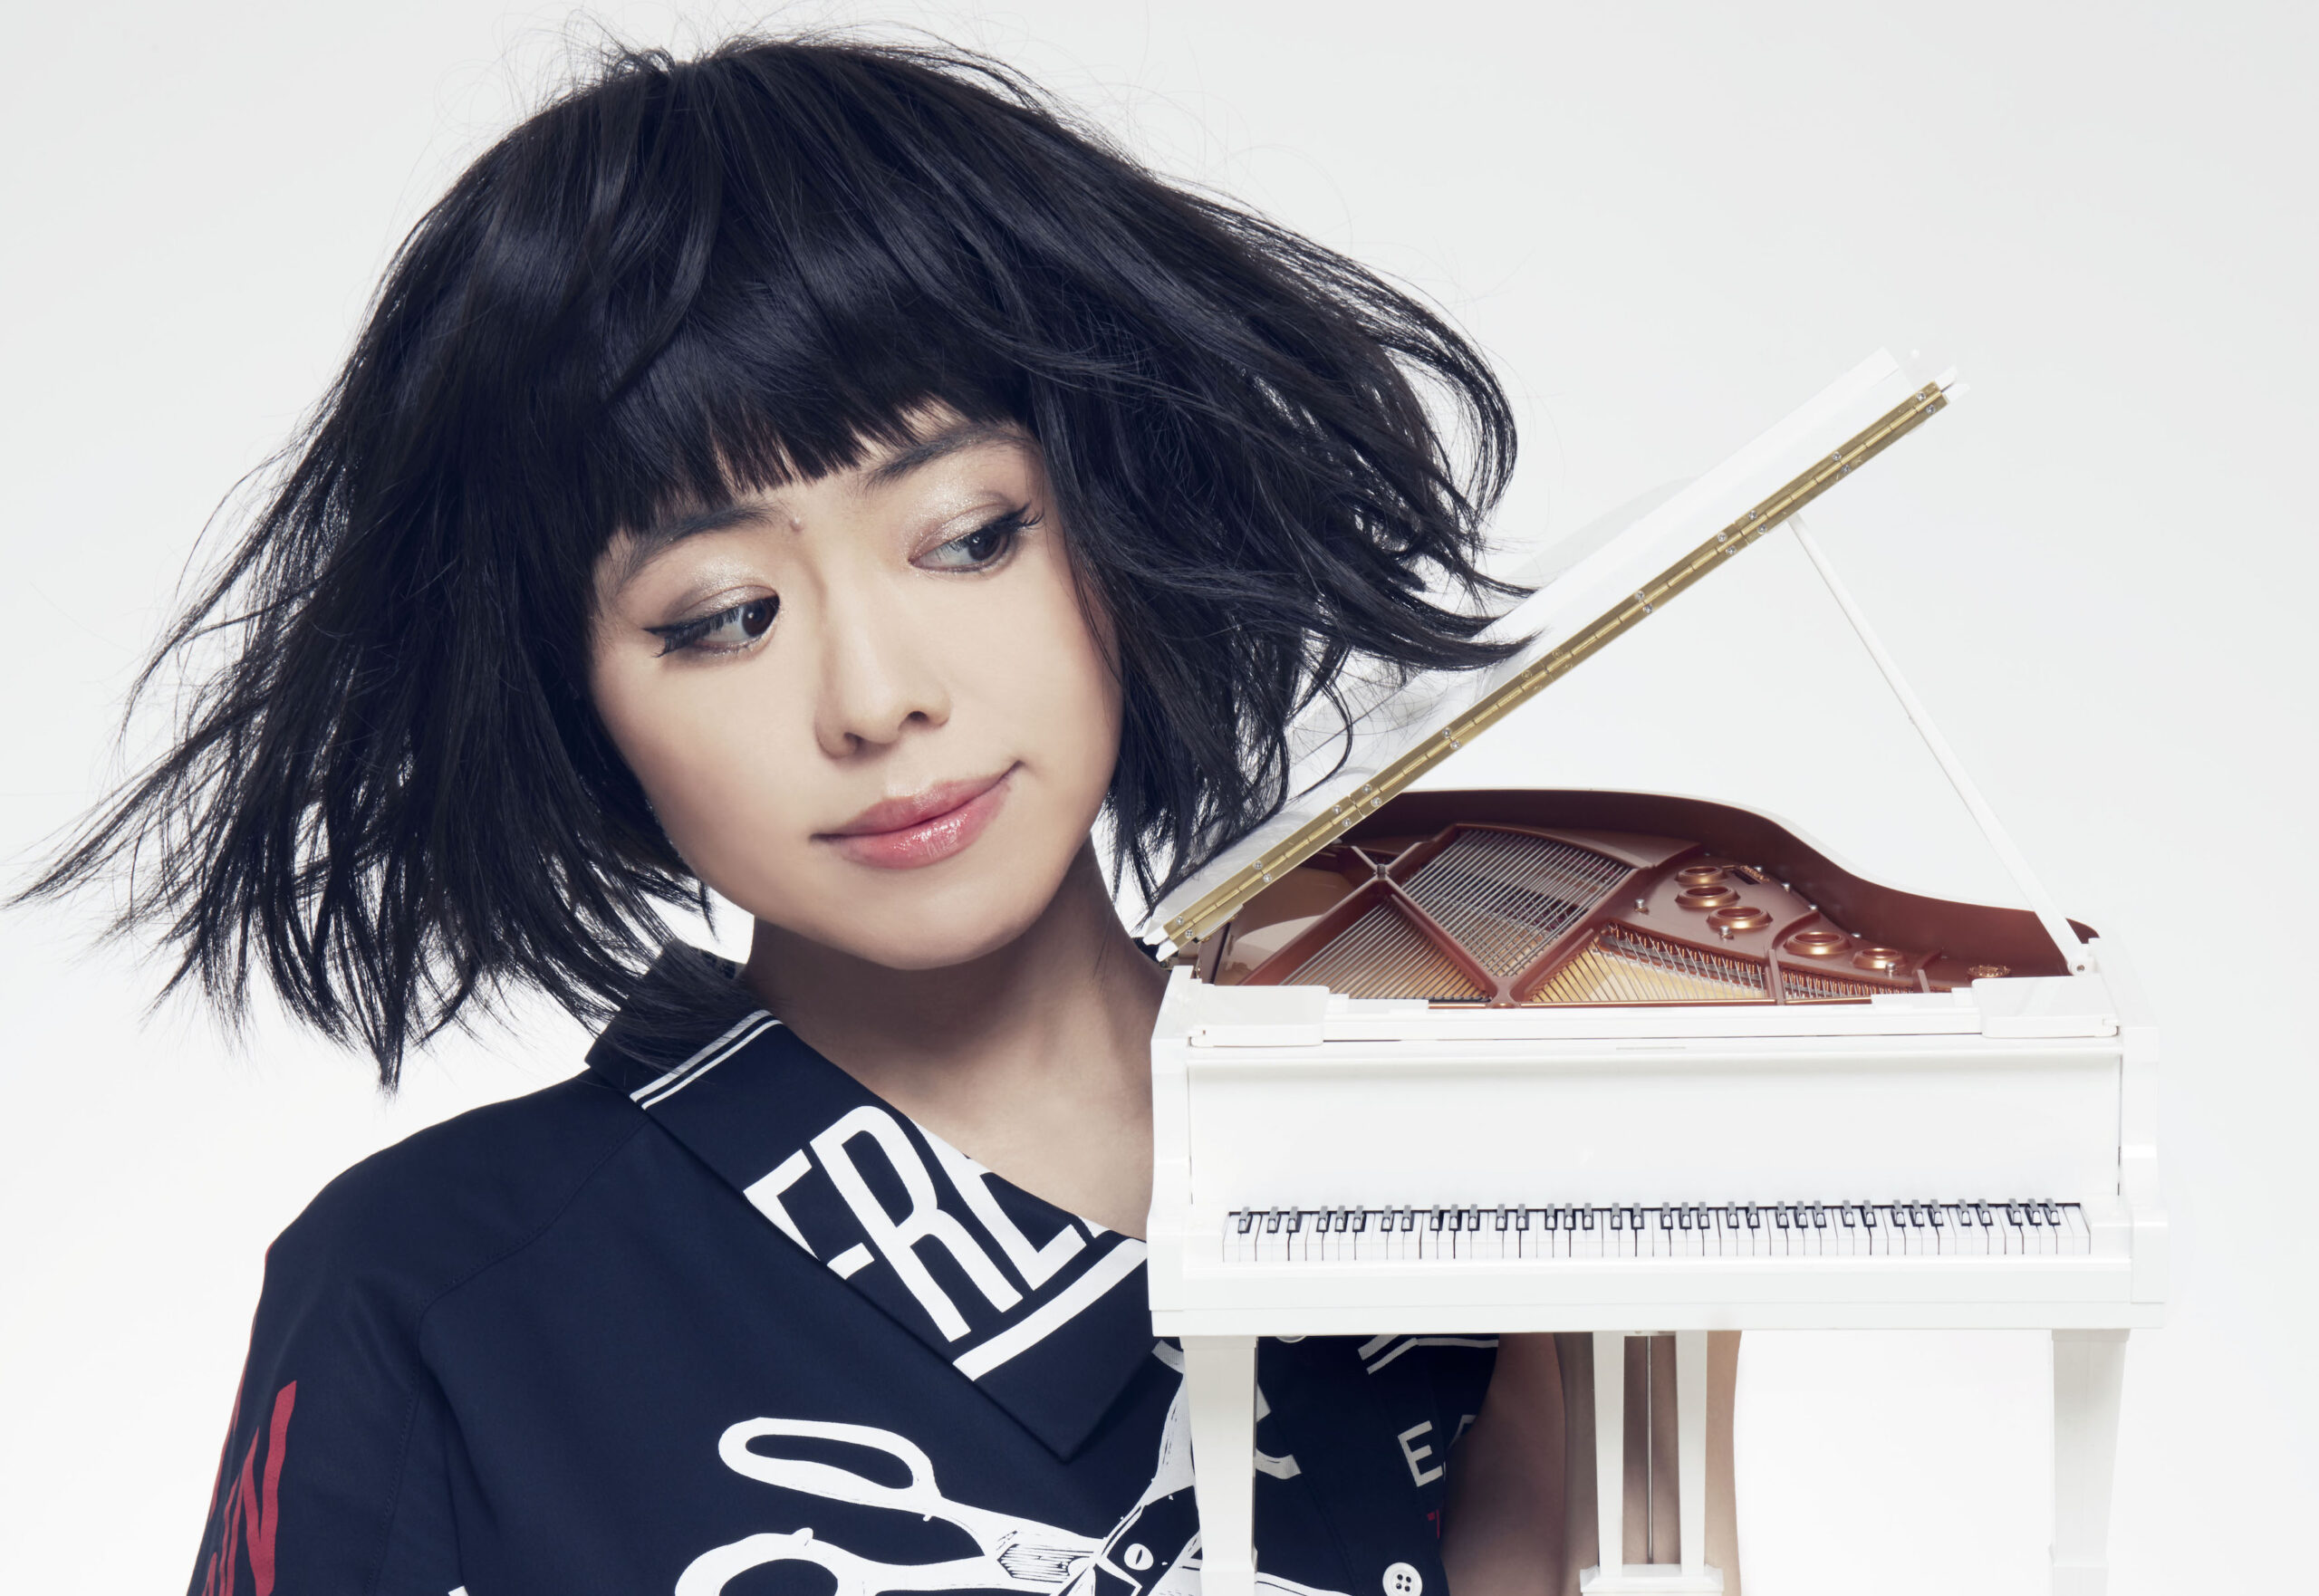 Hiromi holds a toy piano and looks at it wistfully. Photo by Muga Miyahara.